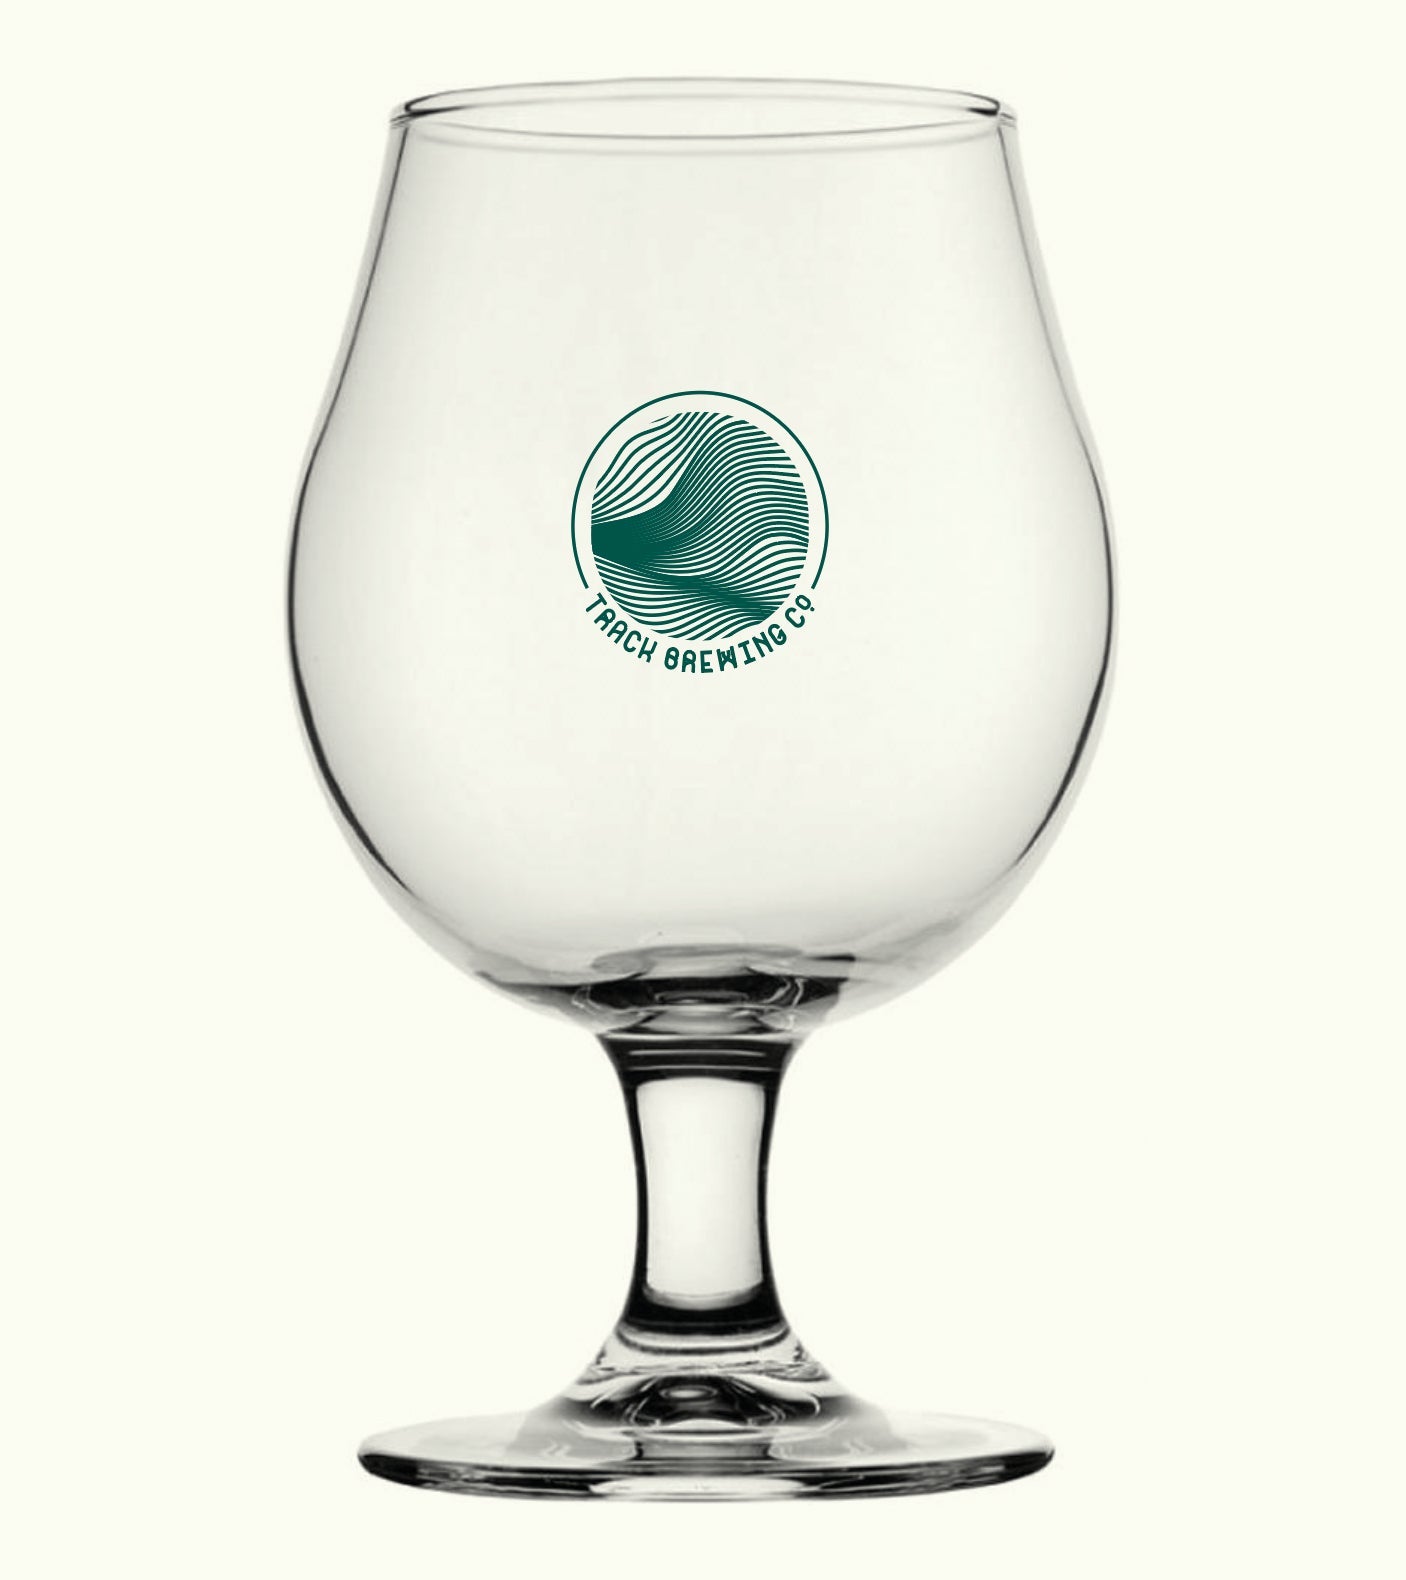 *Christmas Deal* Wave Glass - Track Brewing Company Limited